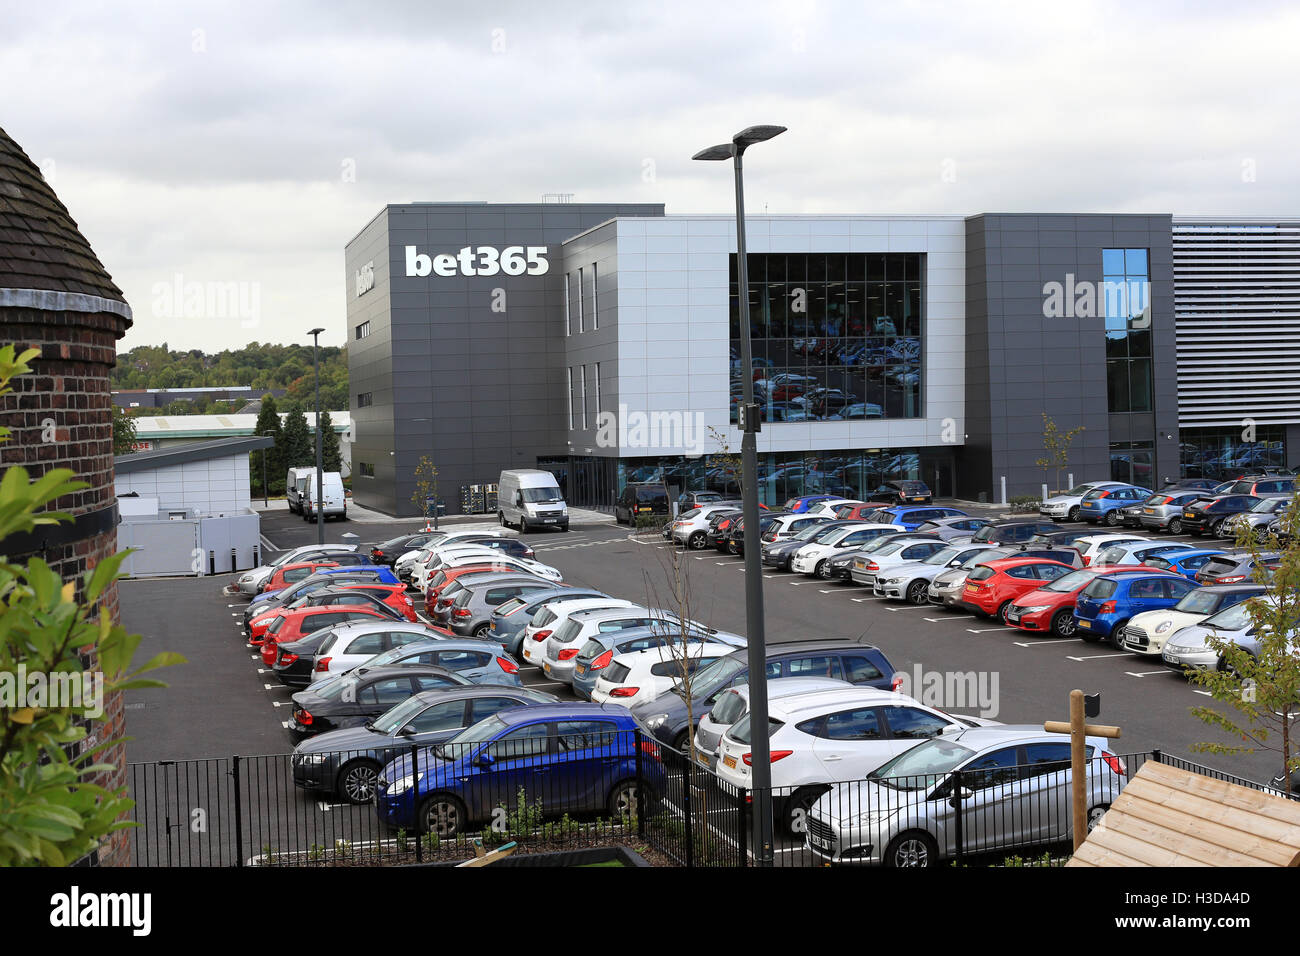 Bet 365 headquarters in Etruria, Stoke on Trent, Staffordshire Stock Photo